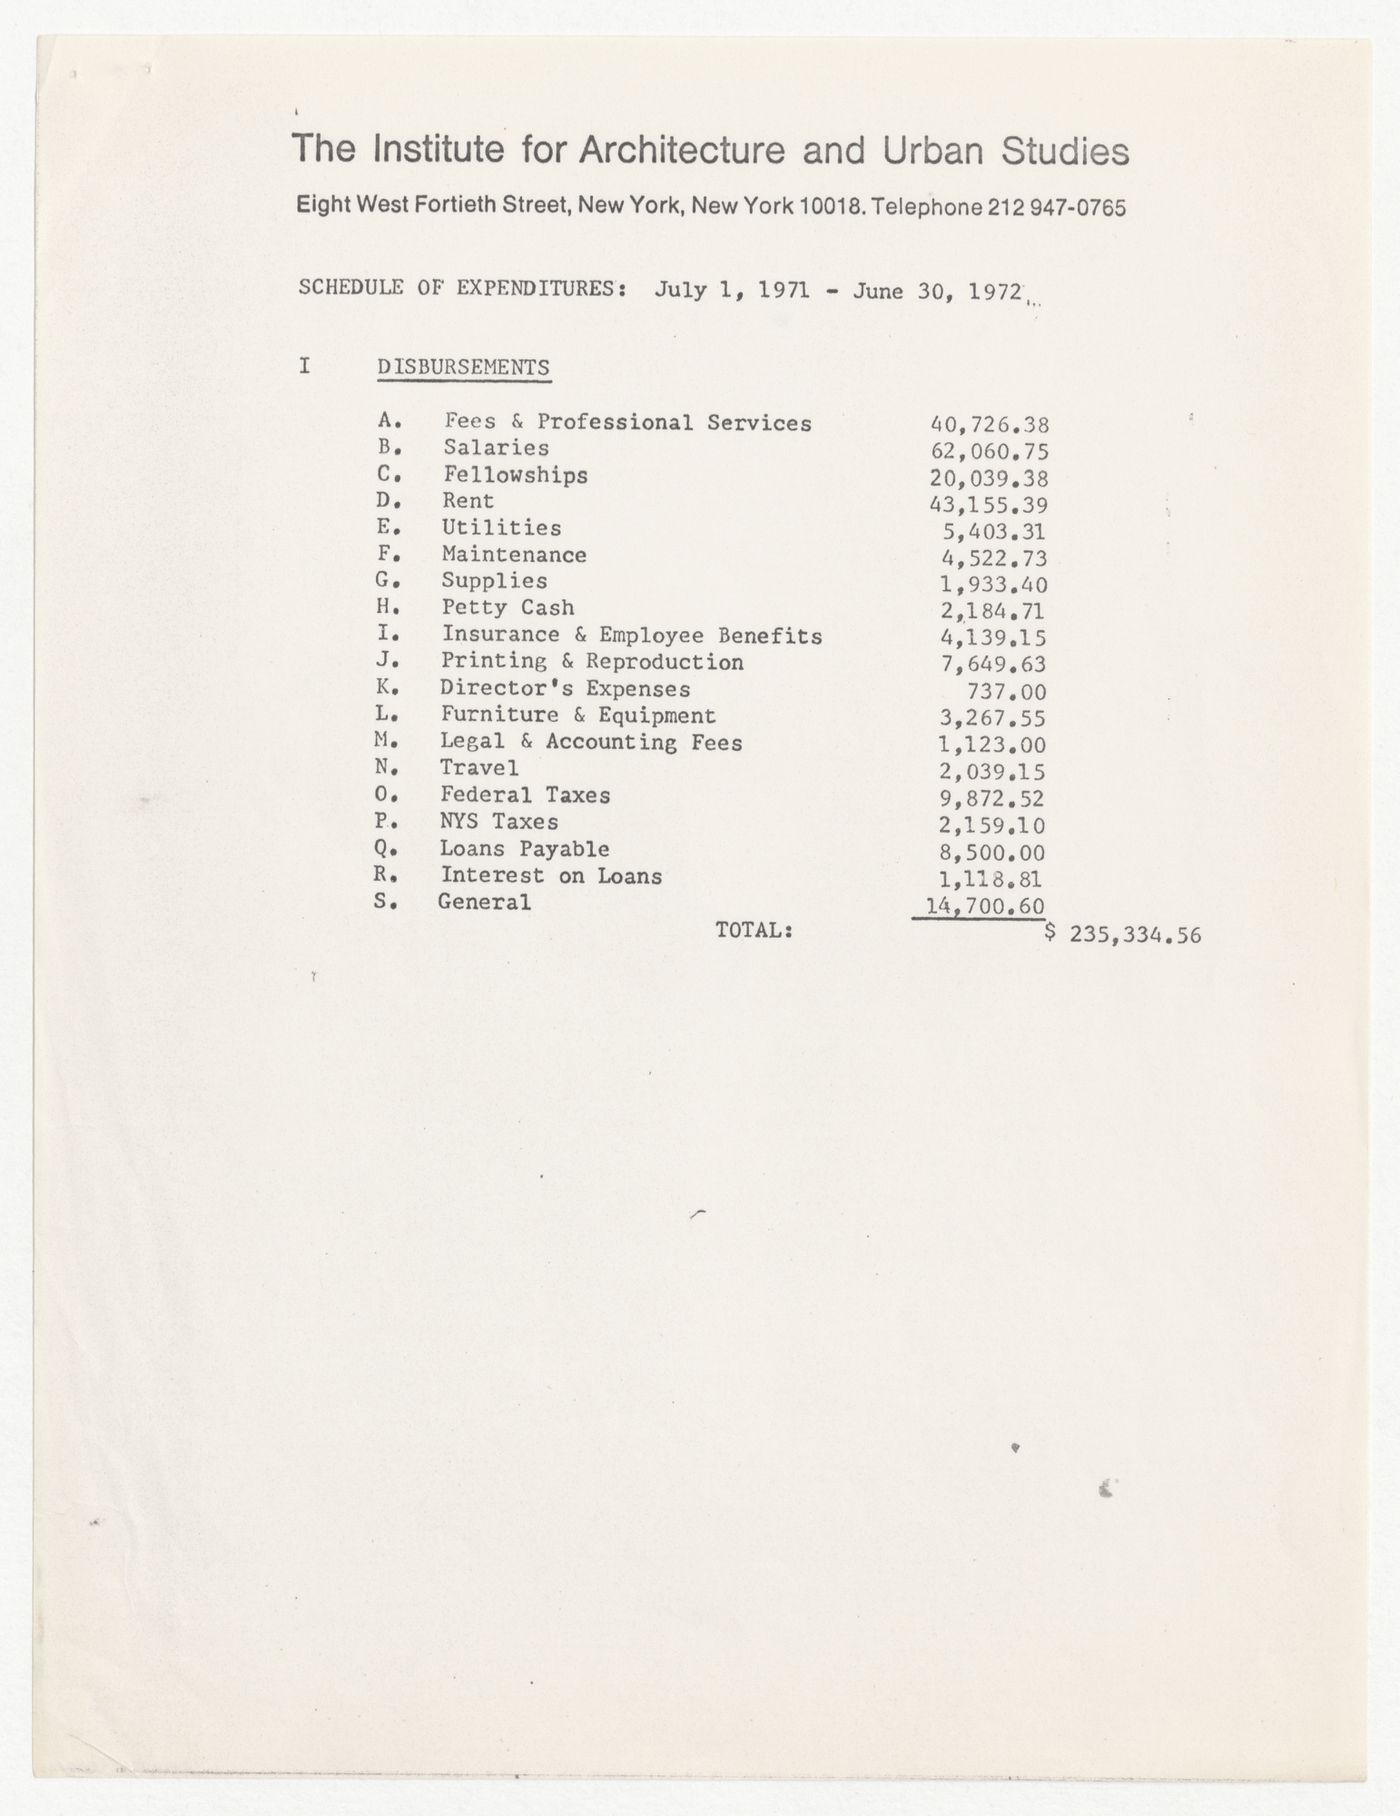 Financial report from July 1st, 1971 to June 30th, 1972